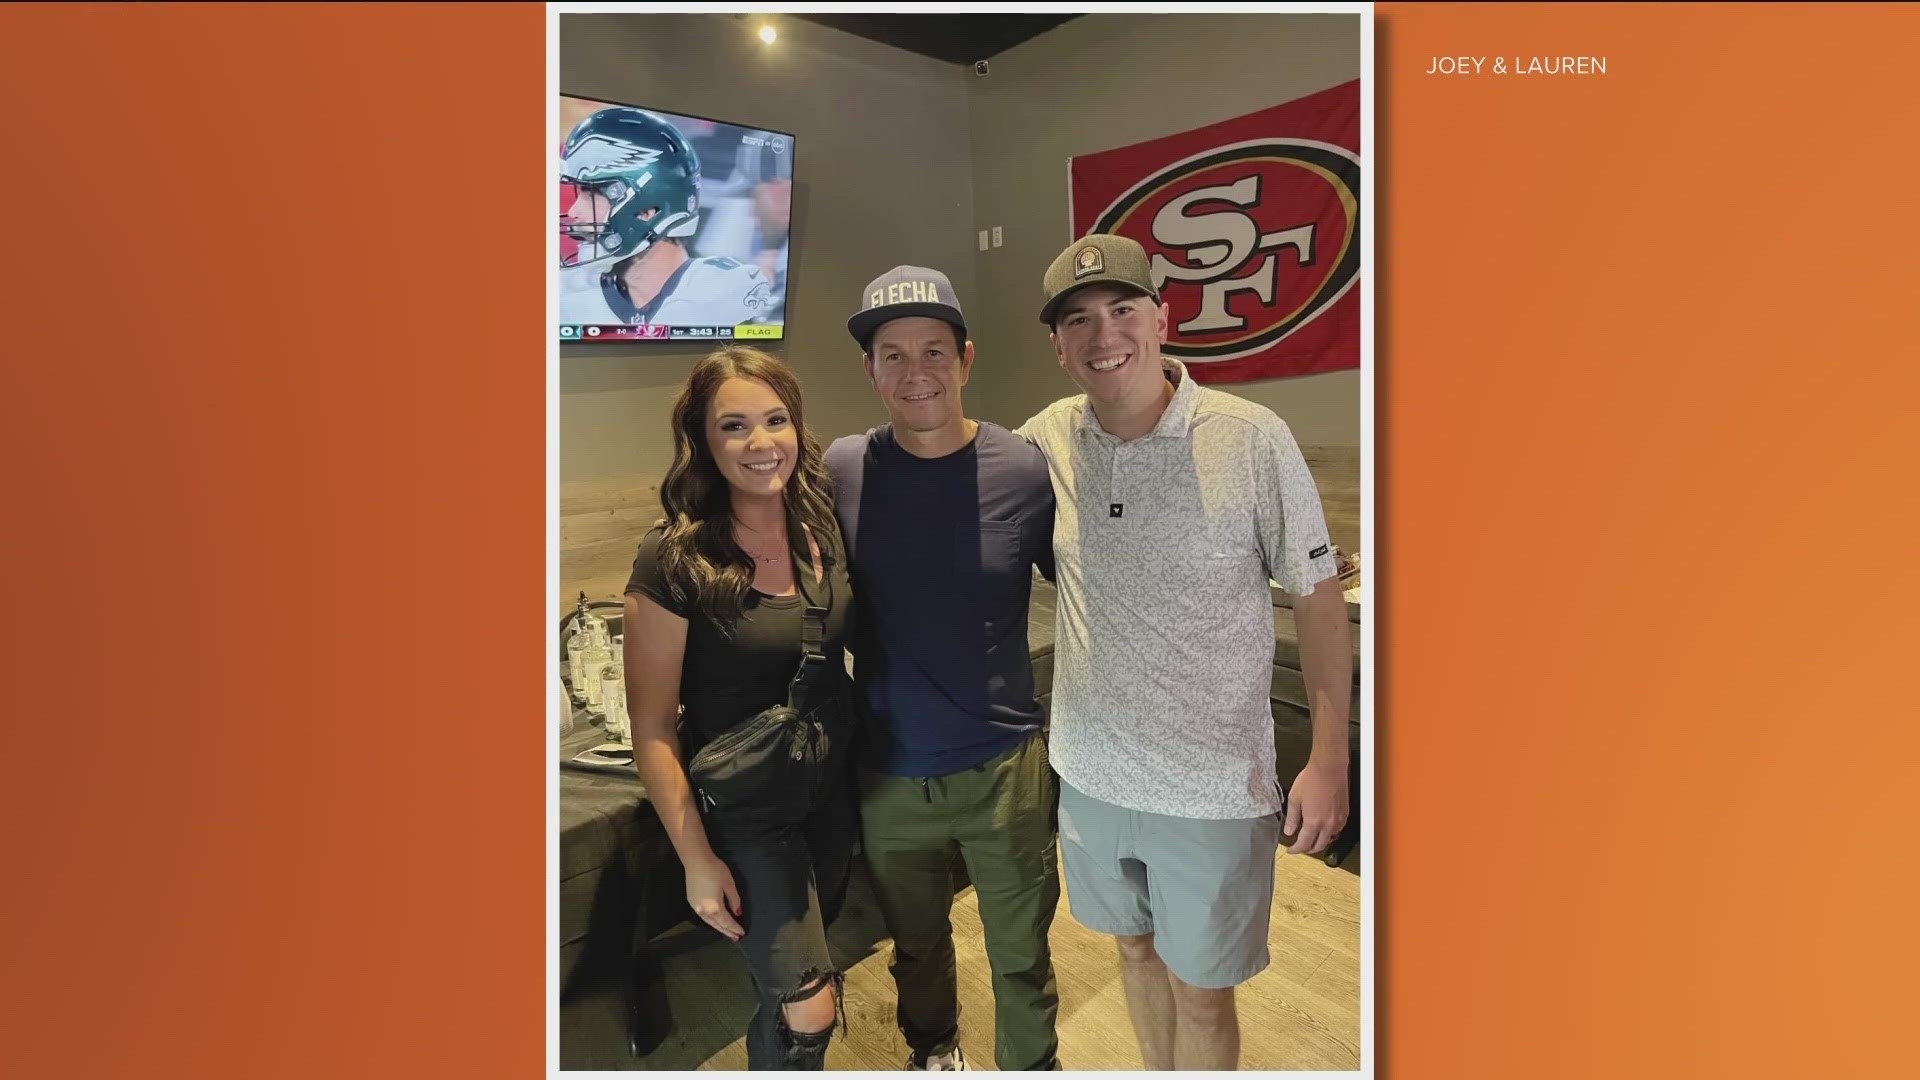 A local radio station met with him in Meridian